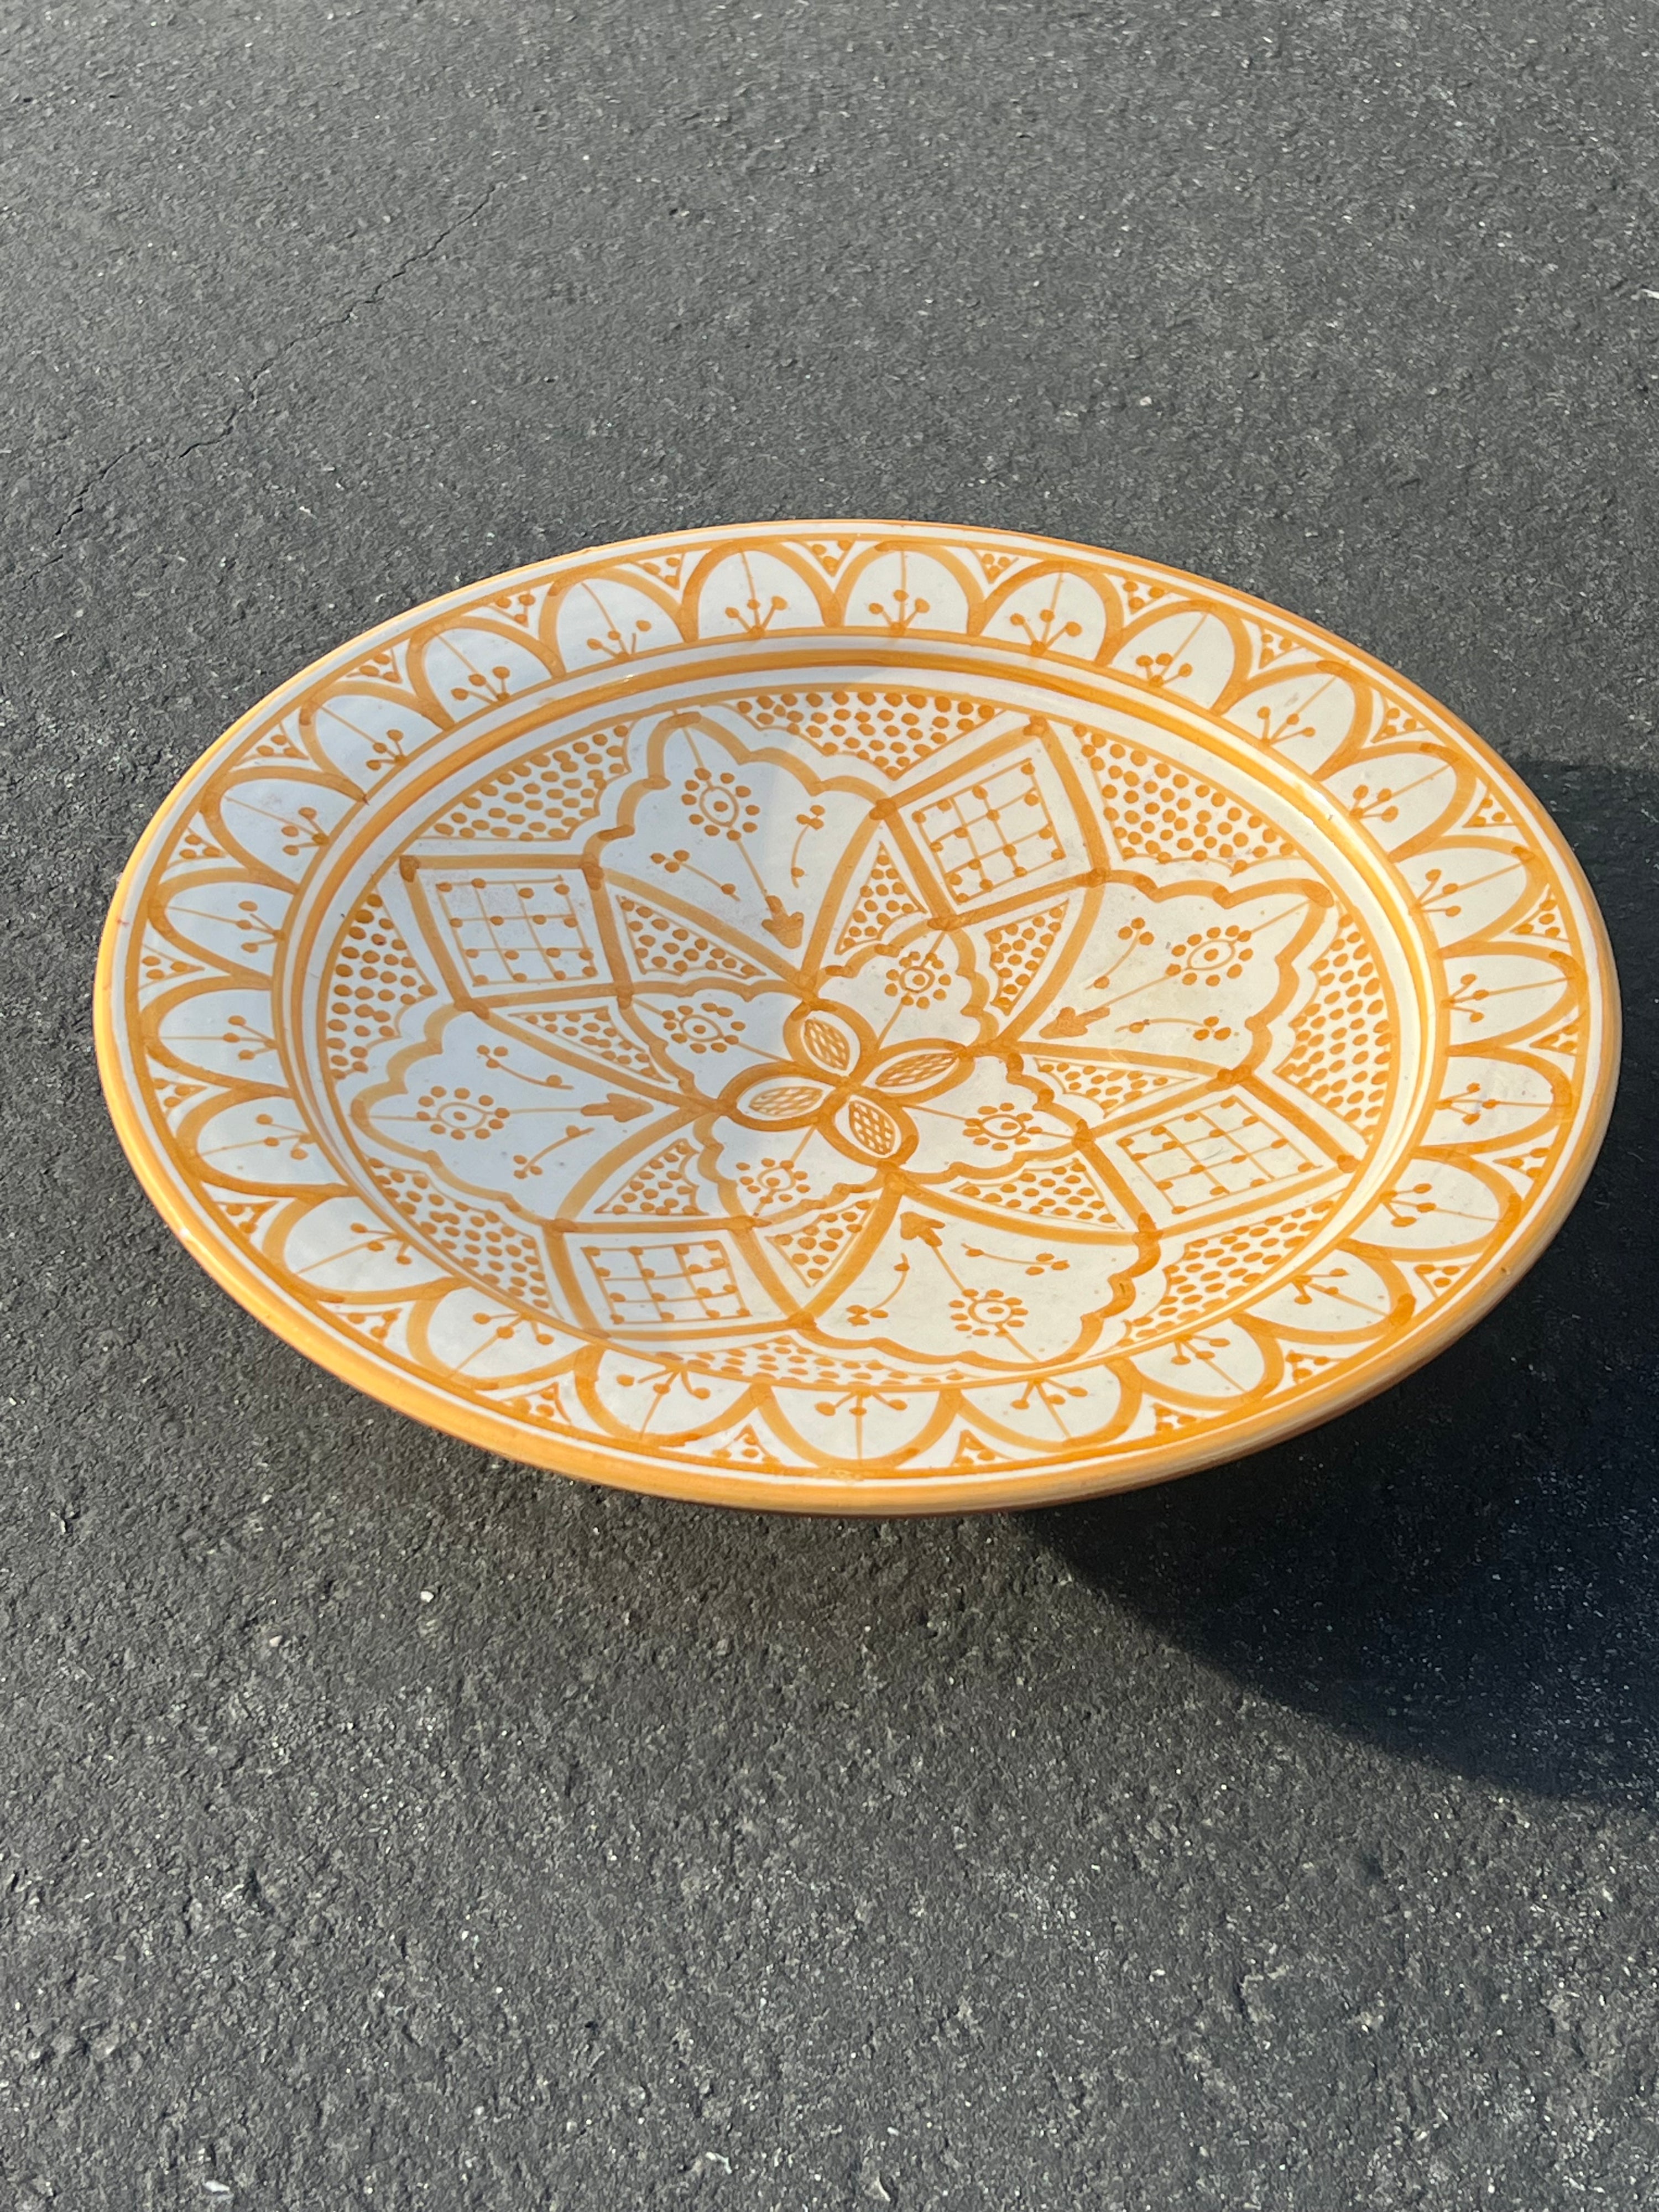 Large Yellow Moroccan Plate (Vintage)